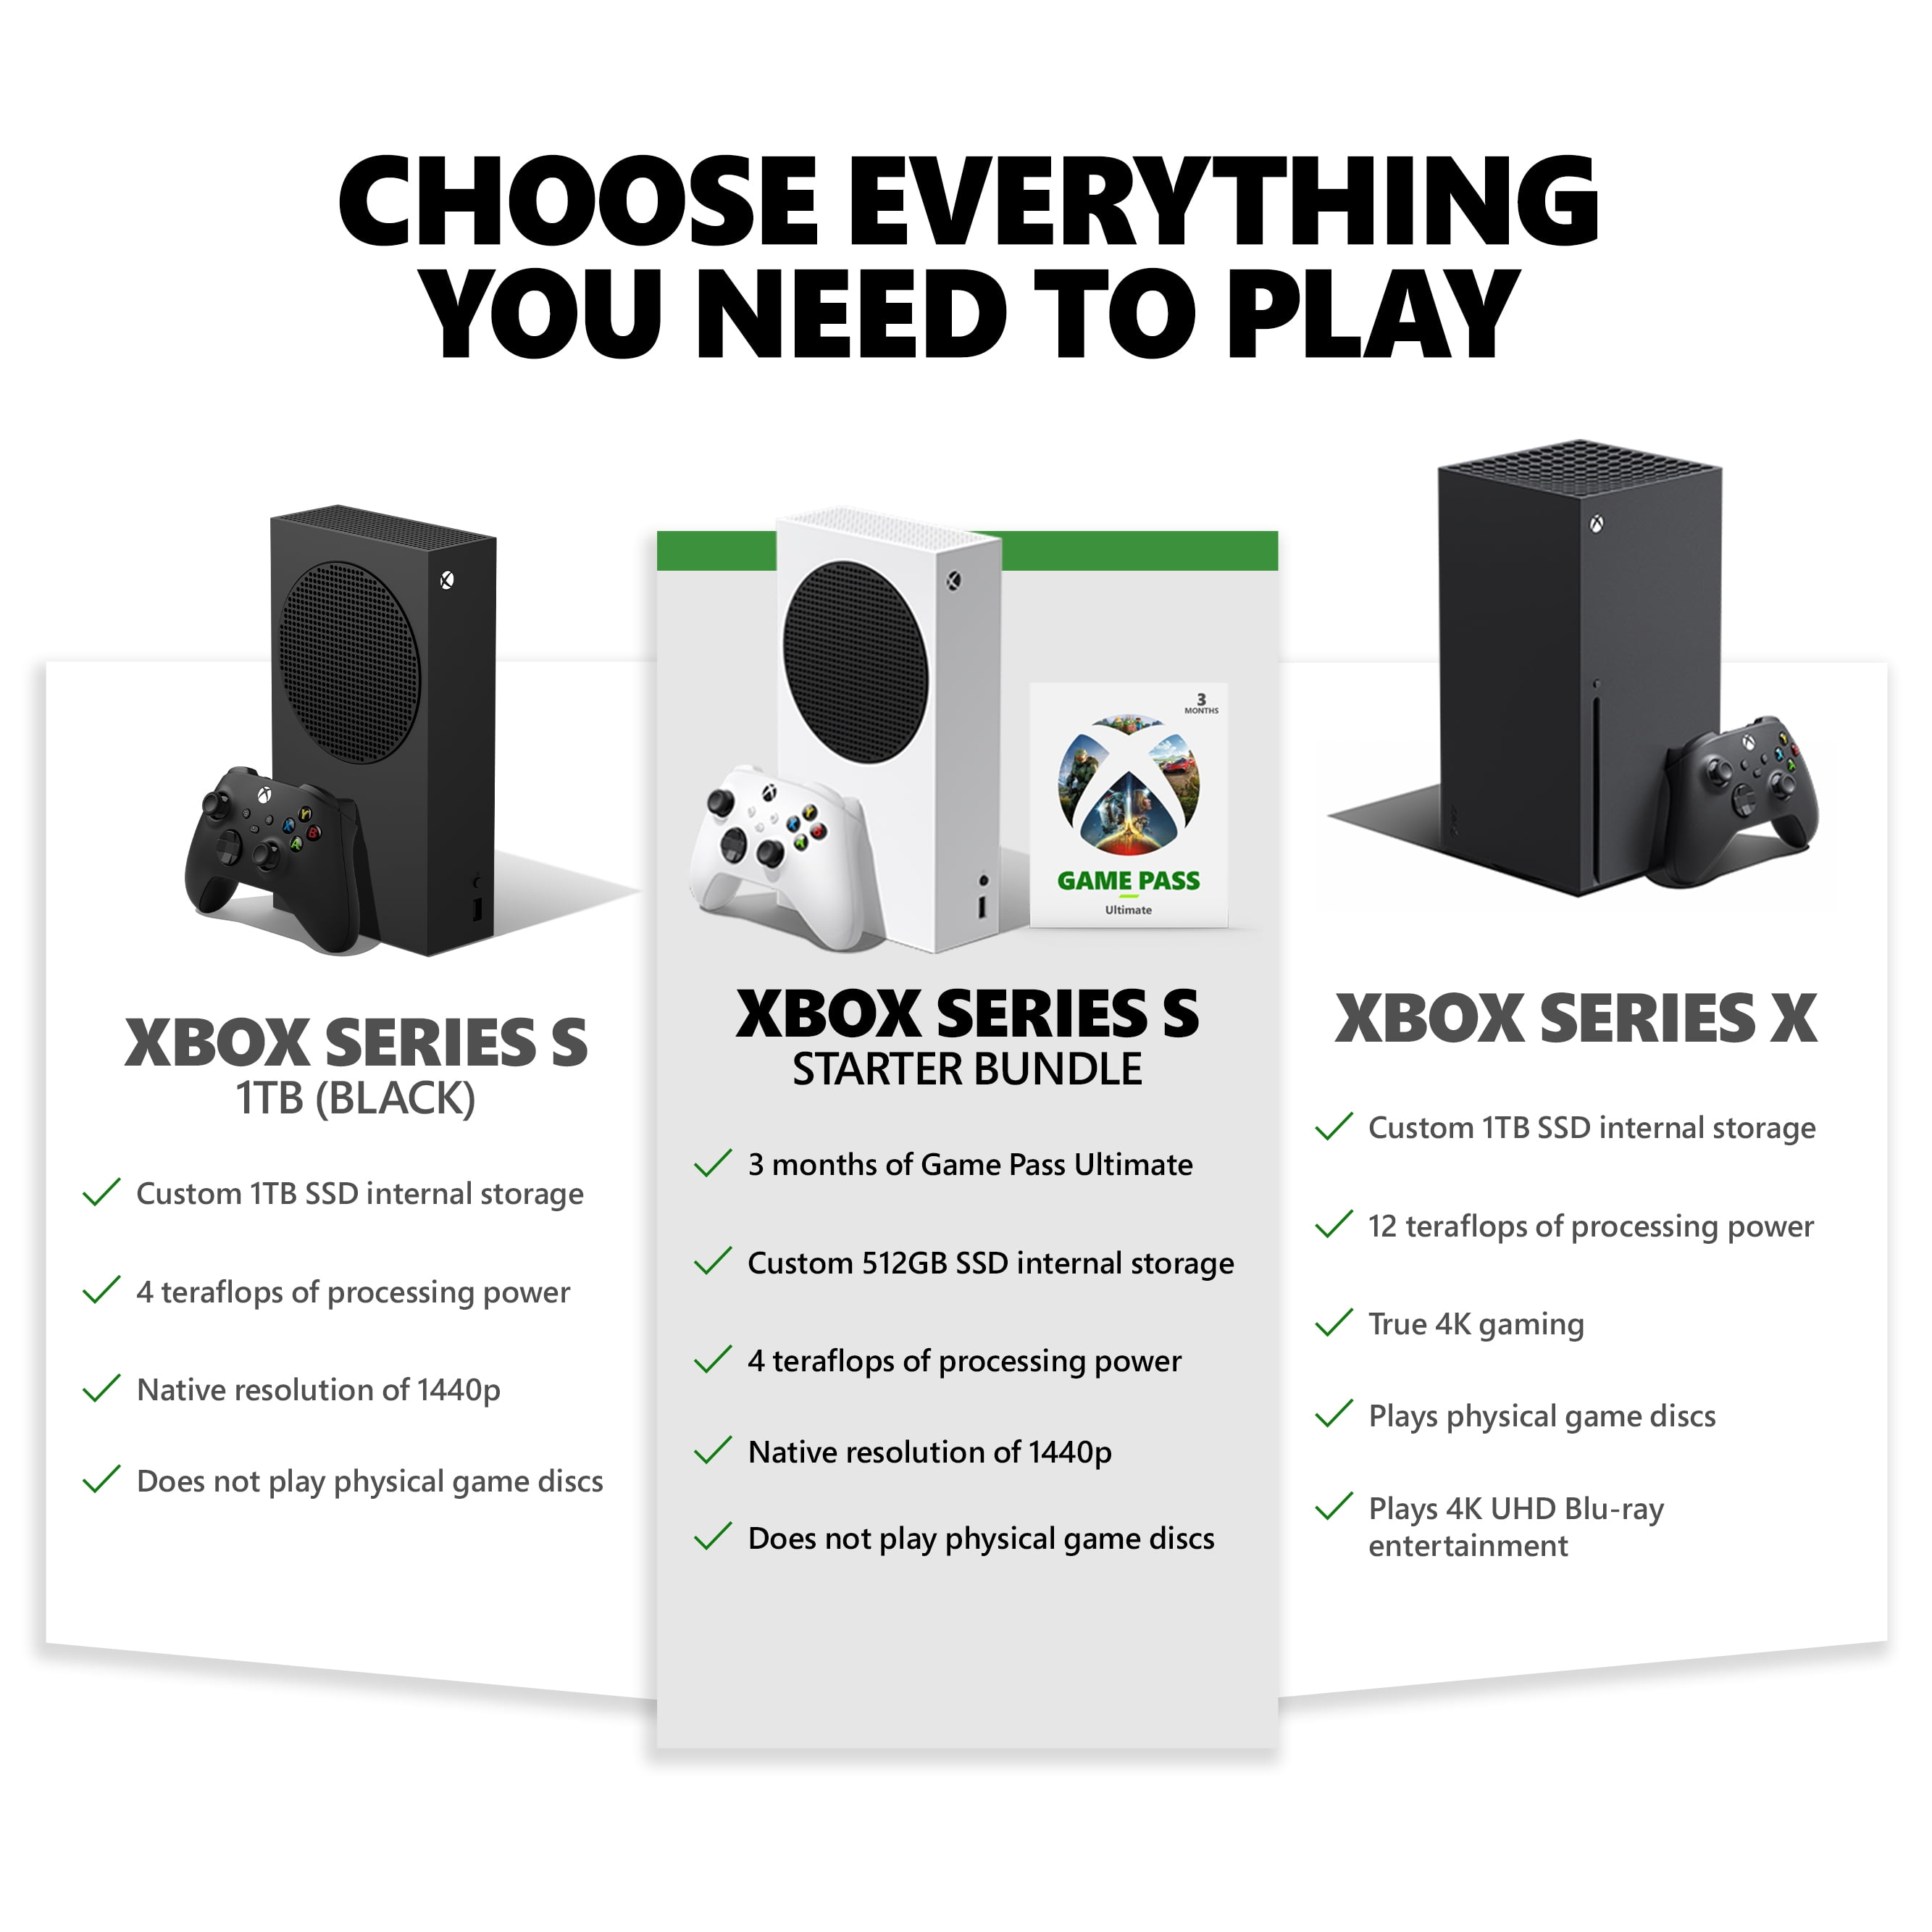 Xbox Series S Starter Bundle including 3 Months of Game Pass